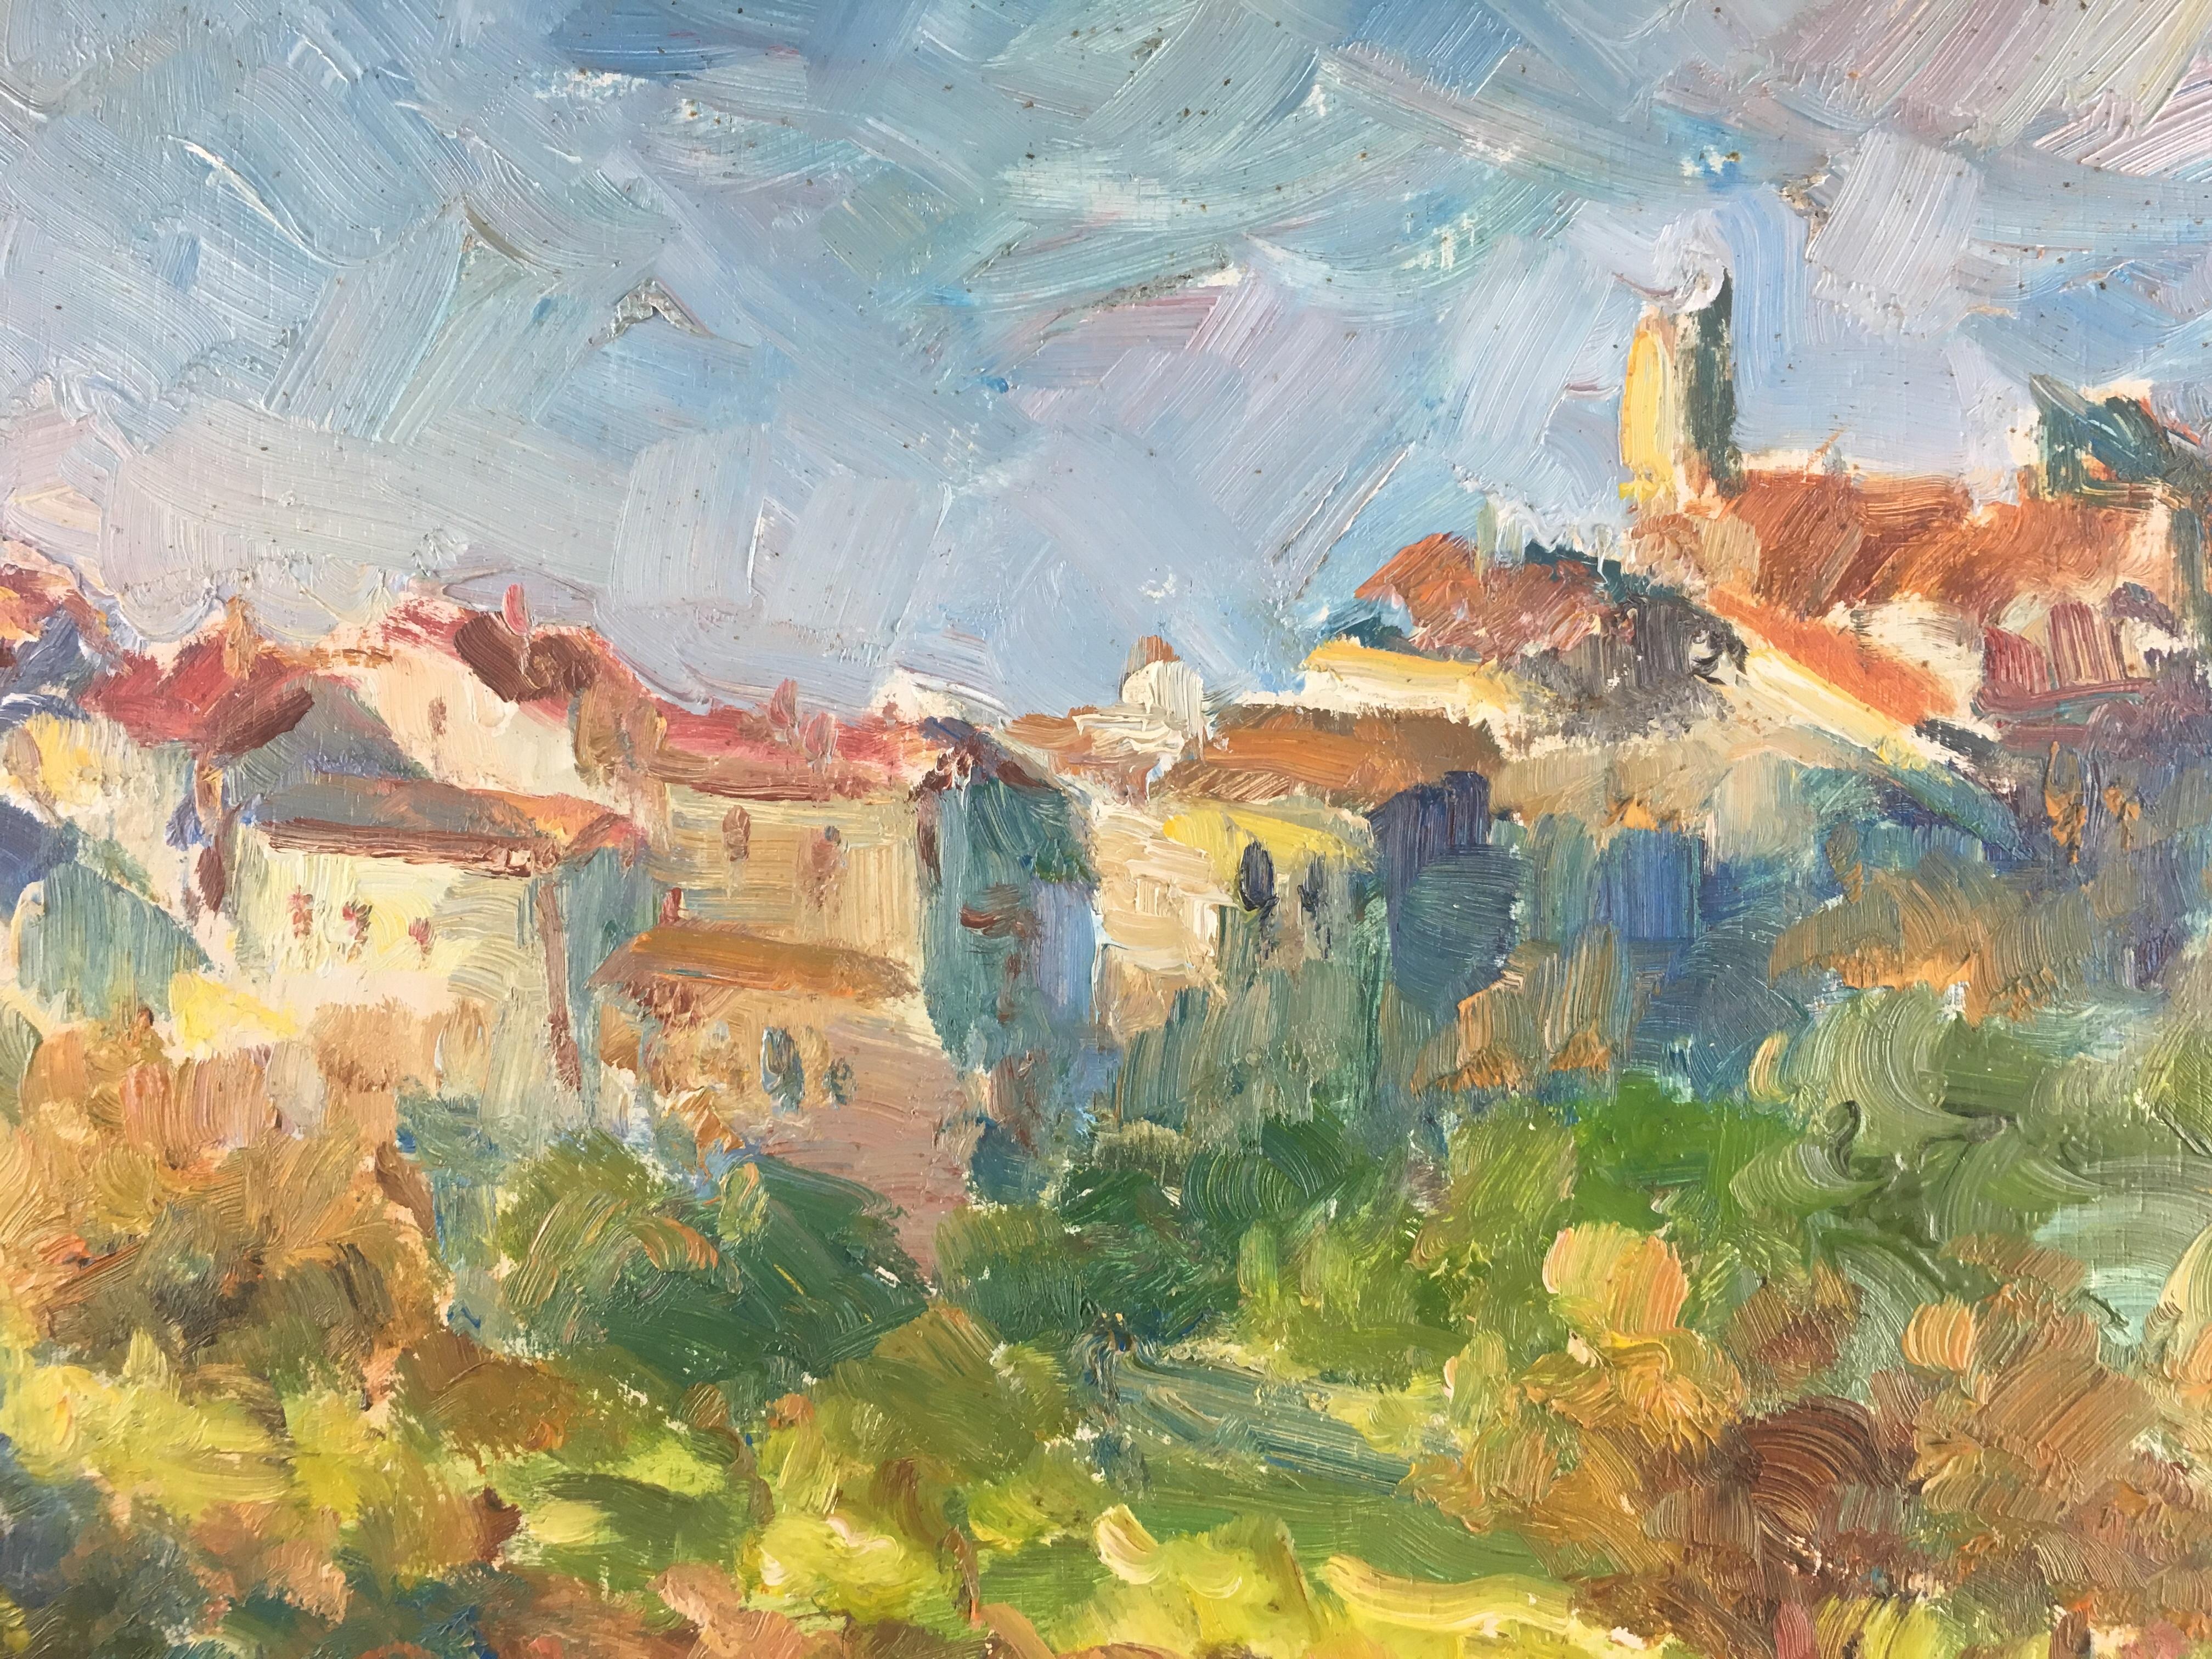 Beautiful original post impressionist painting on isorel (board) depicting a typical Provençal village. Very vivid colors just like the scenery in the region in spring and summer. 
The artist Victor Ferreri is a very well-known listed artist from